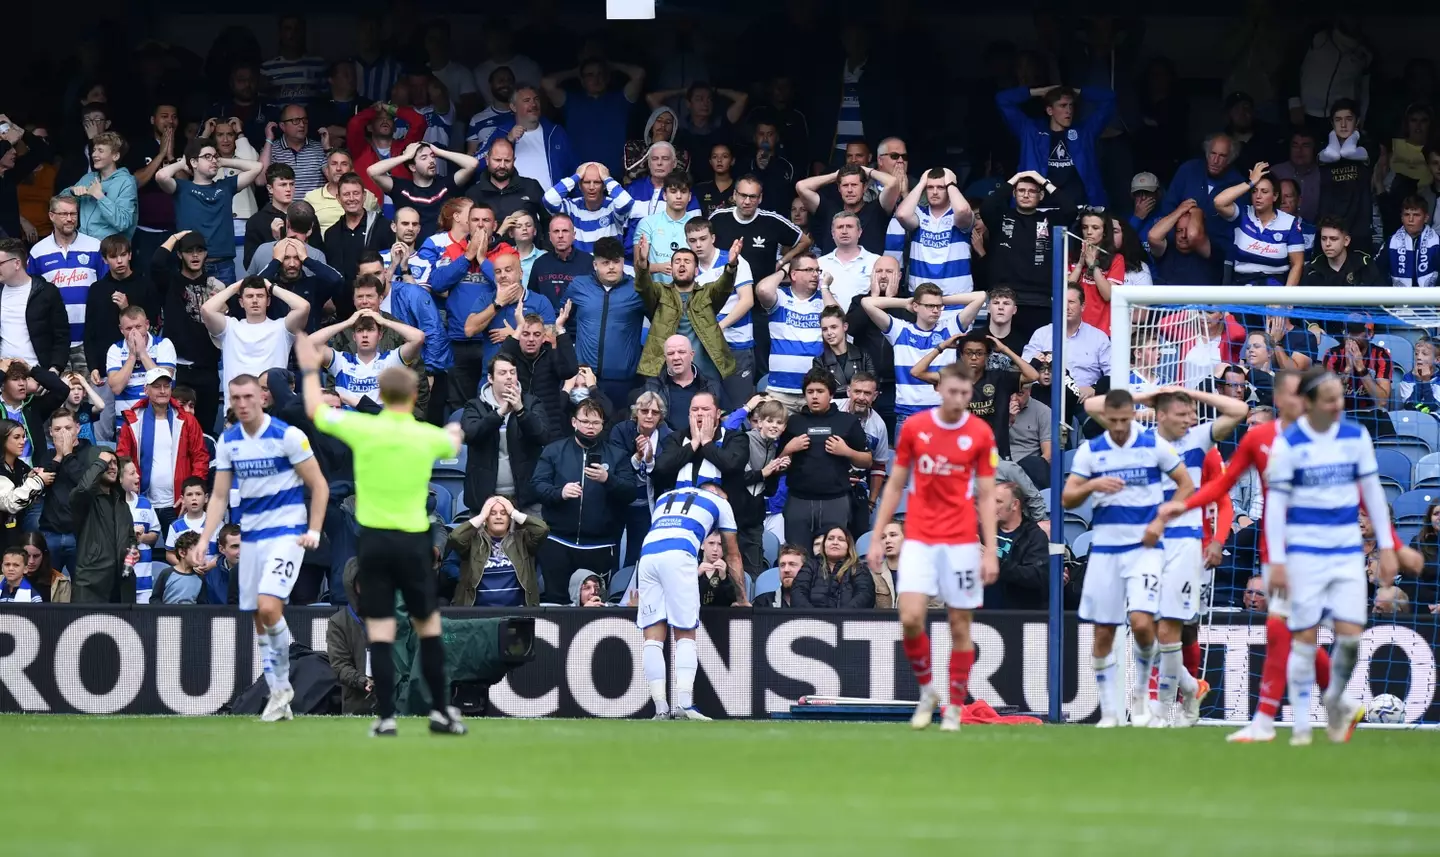 Queens Park Rangers are still unbeaten and sit fifth in the Championship table